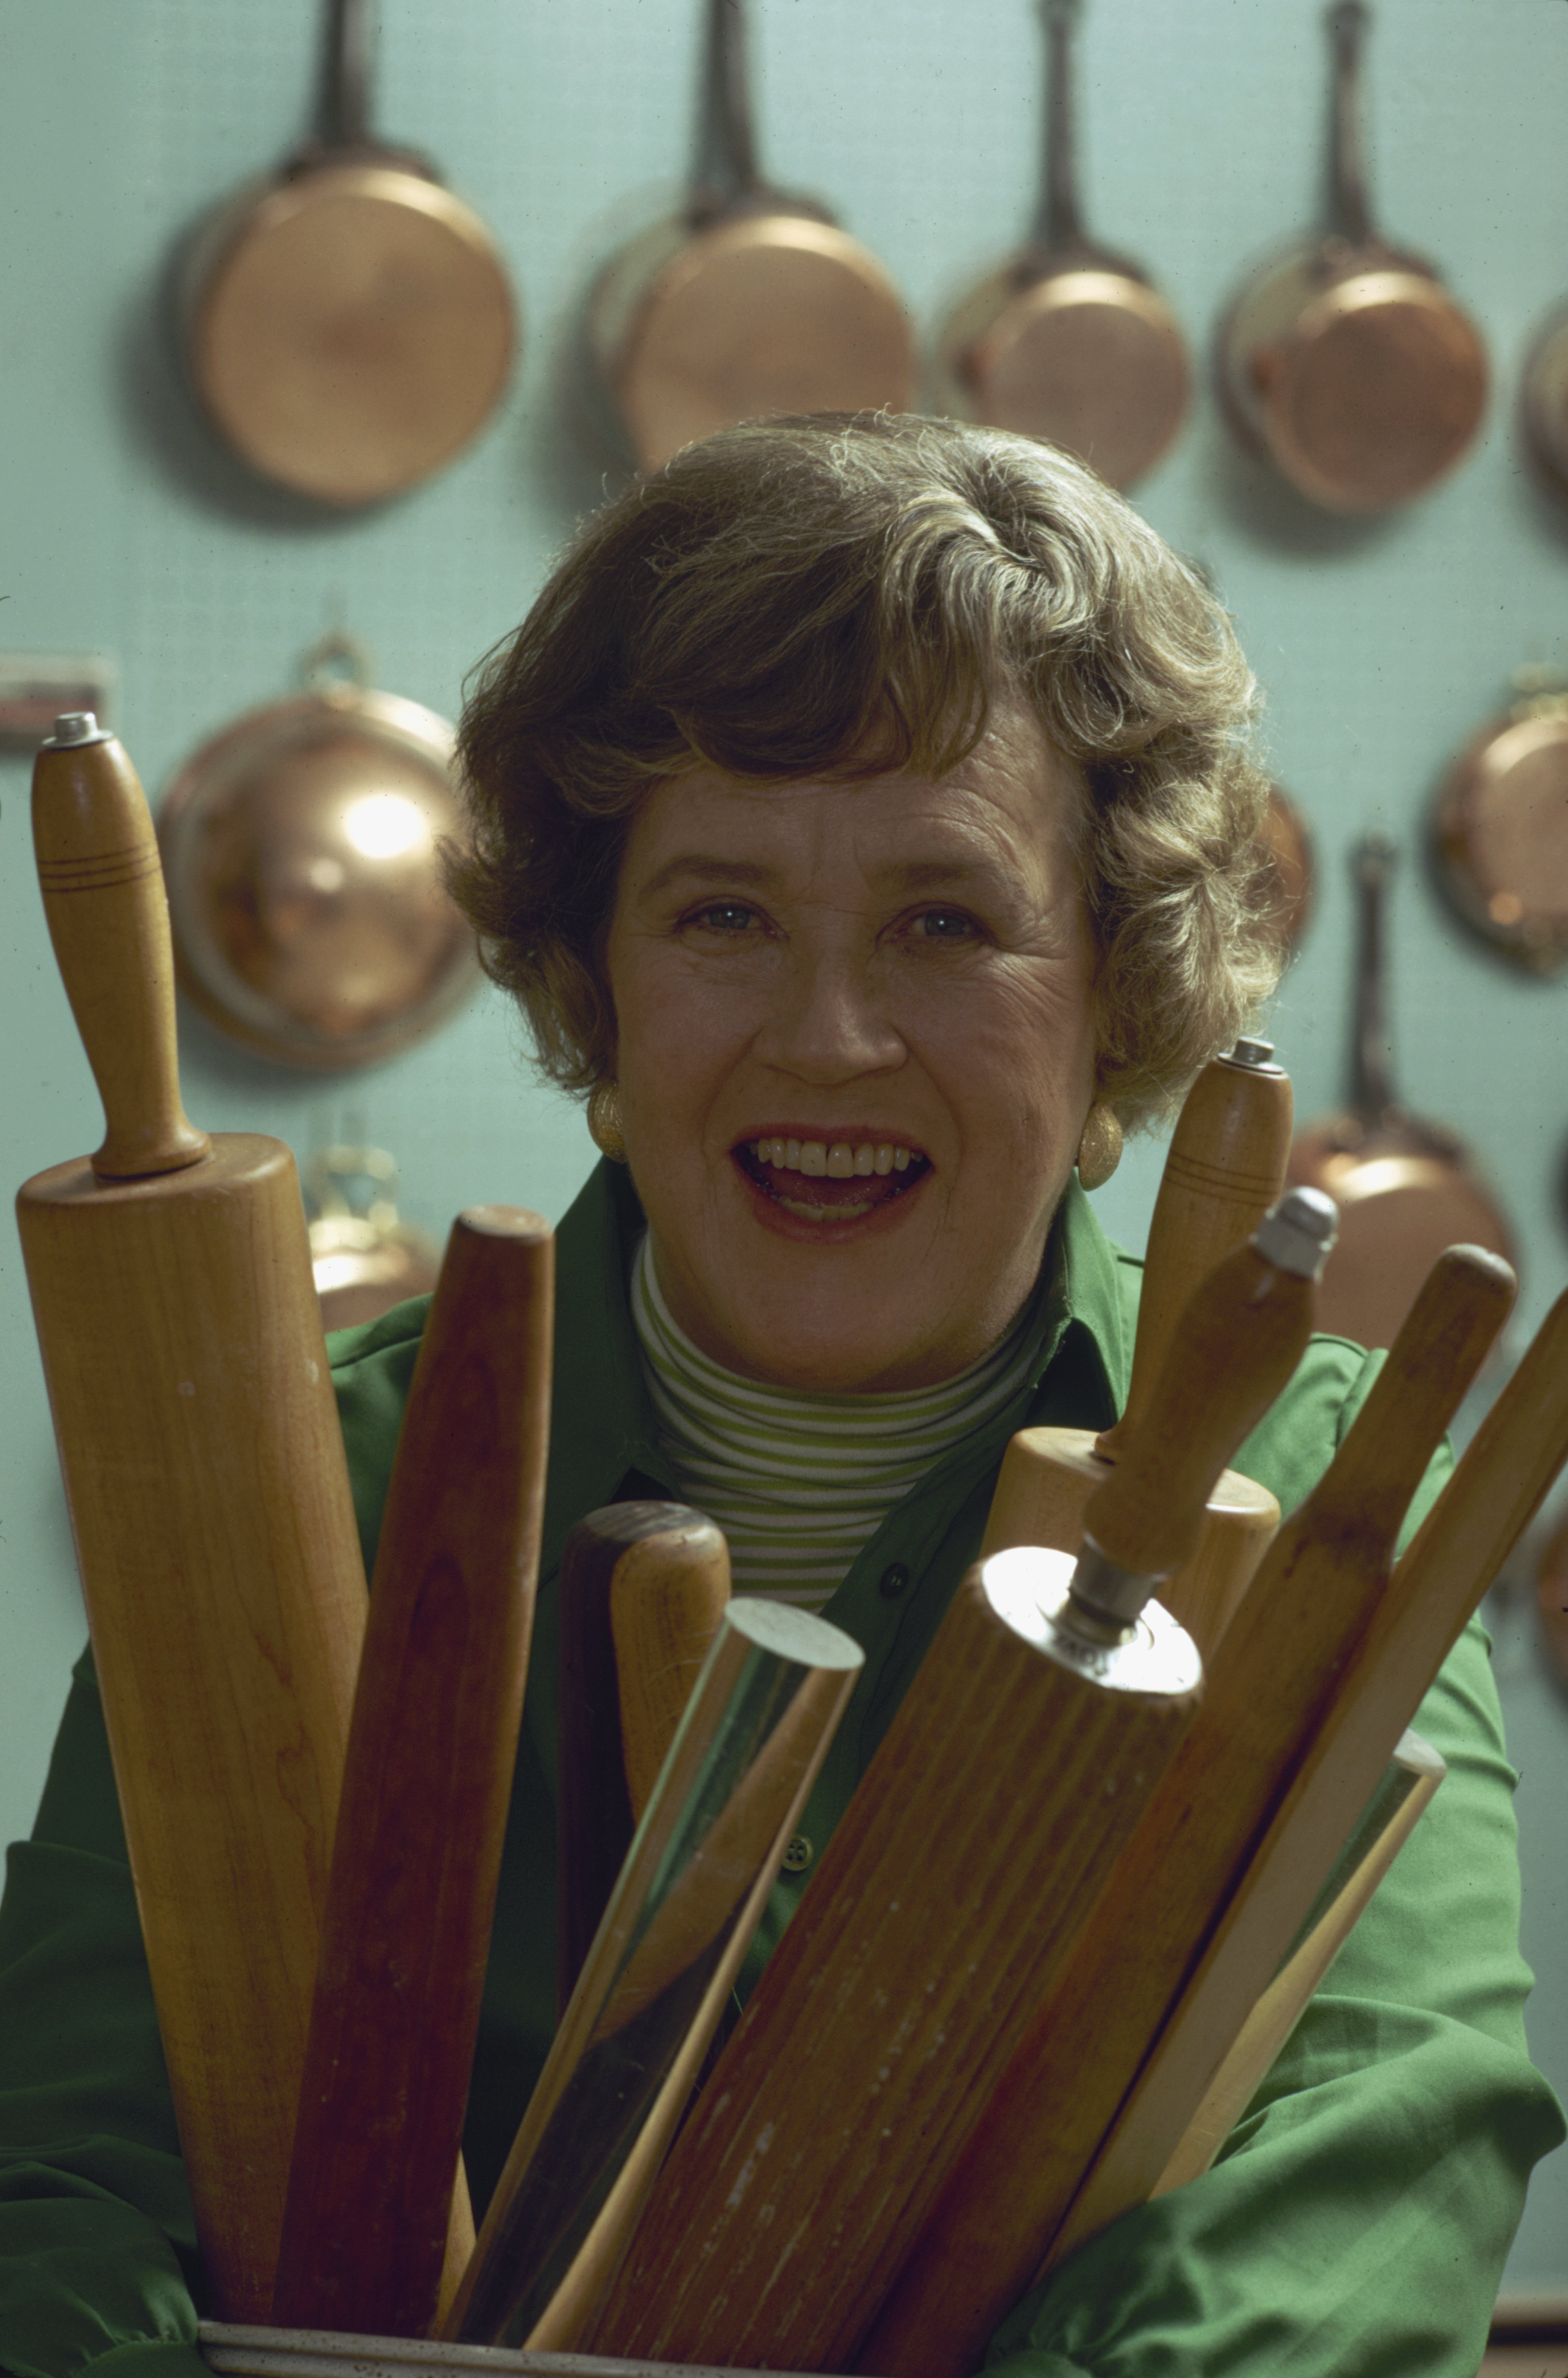 An undated picture of cooking teacher Julia Child posing with assorted rolling pins while smiling. Photo: Getty Images